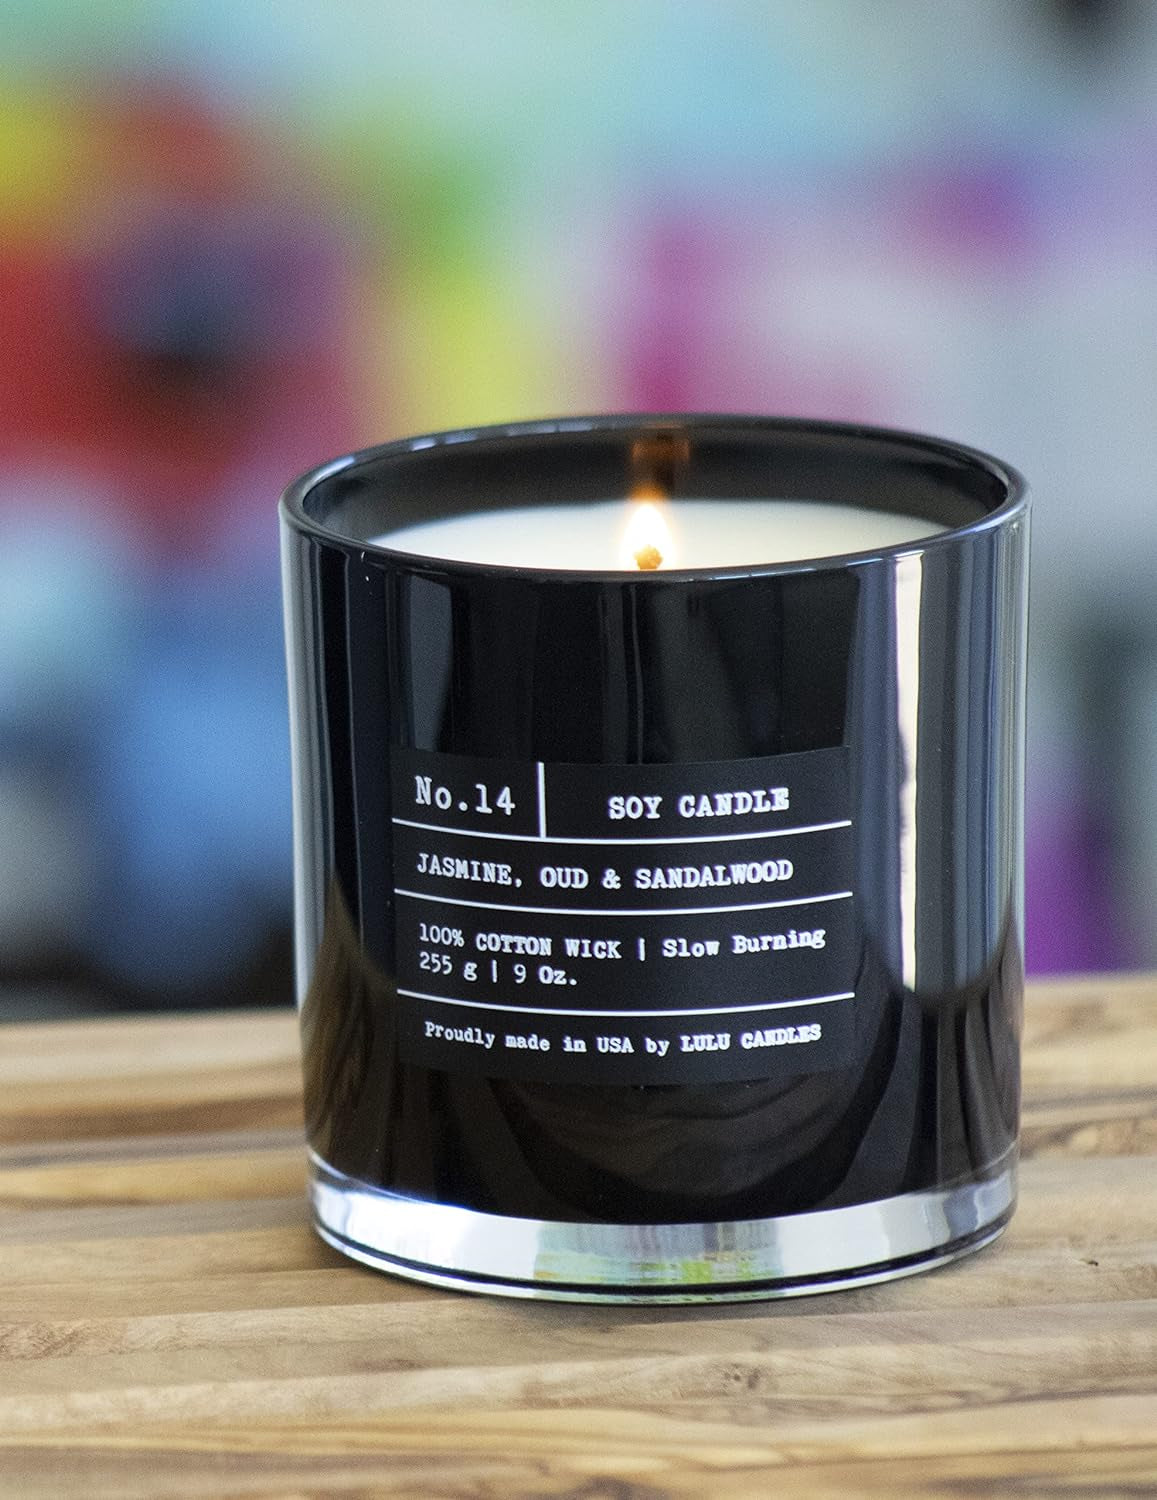 | Jasmine, Oud & Sandalwood | Luxury Scented Soy Jar Candle | Hand Poured in the USA | Highly Scented & Long Lasting (9 Oz.)